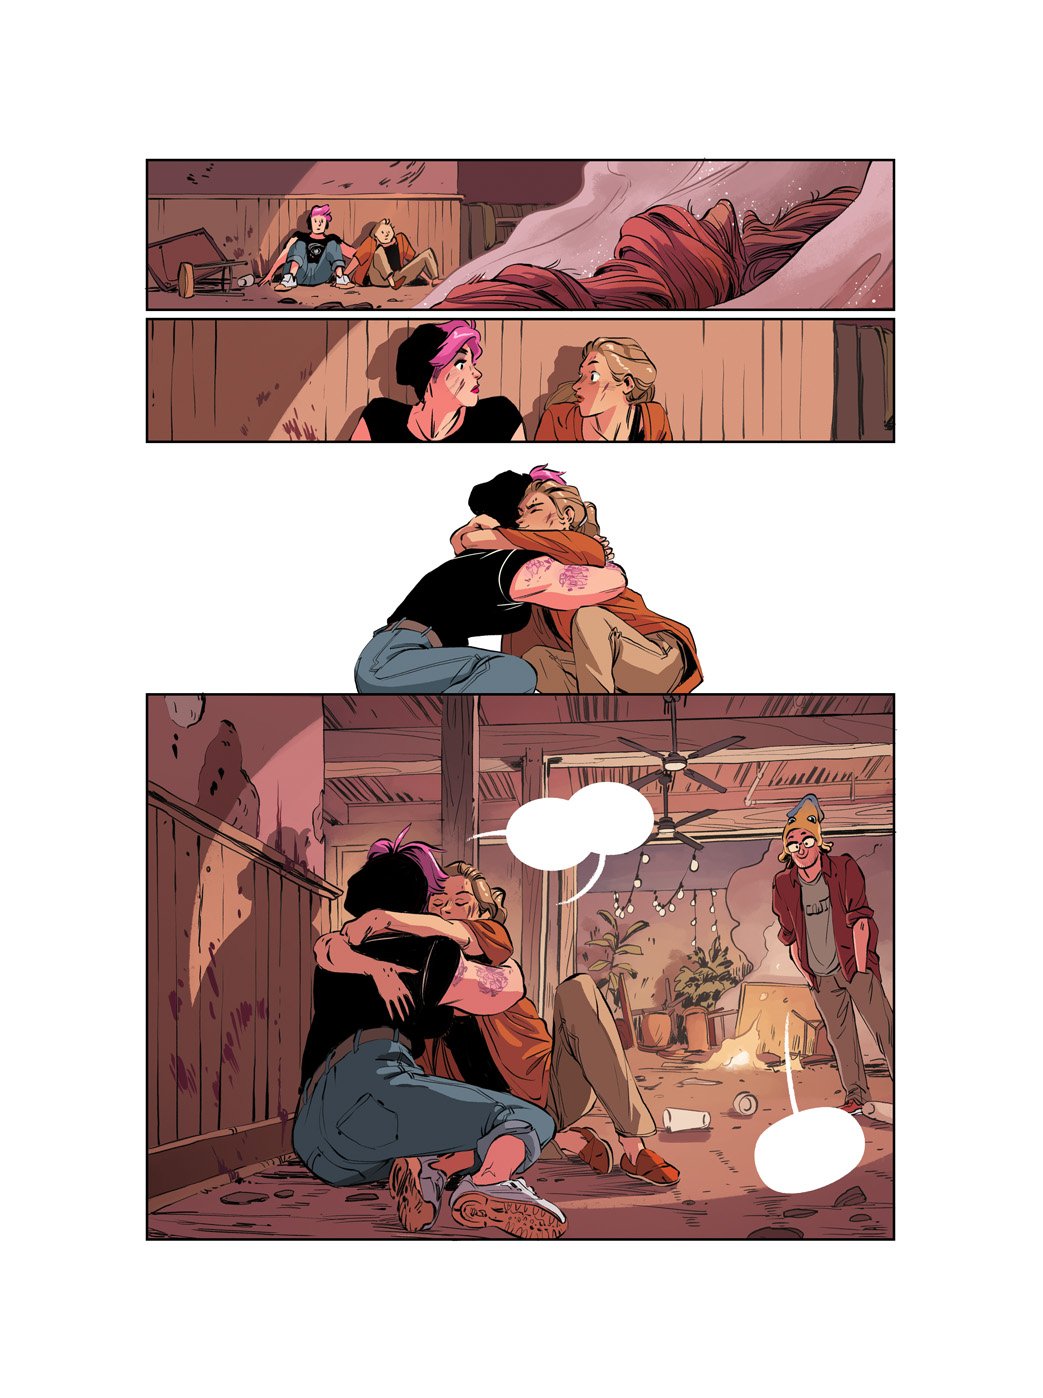  Sample page from “Bubble”.  Artwork by Tony Cliff, writing by Jordan Morris and Sarah Morgan, colors by Natalie Riess. Published by First Second 2021 